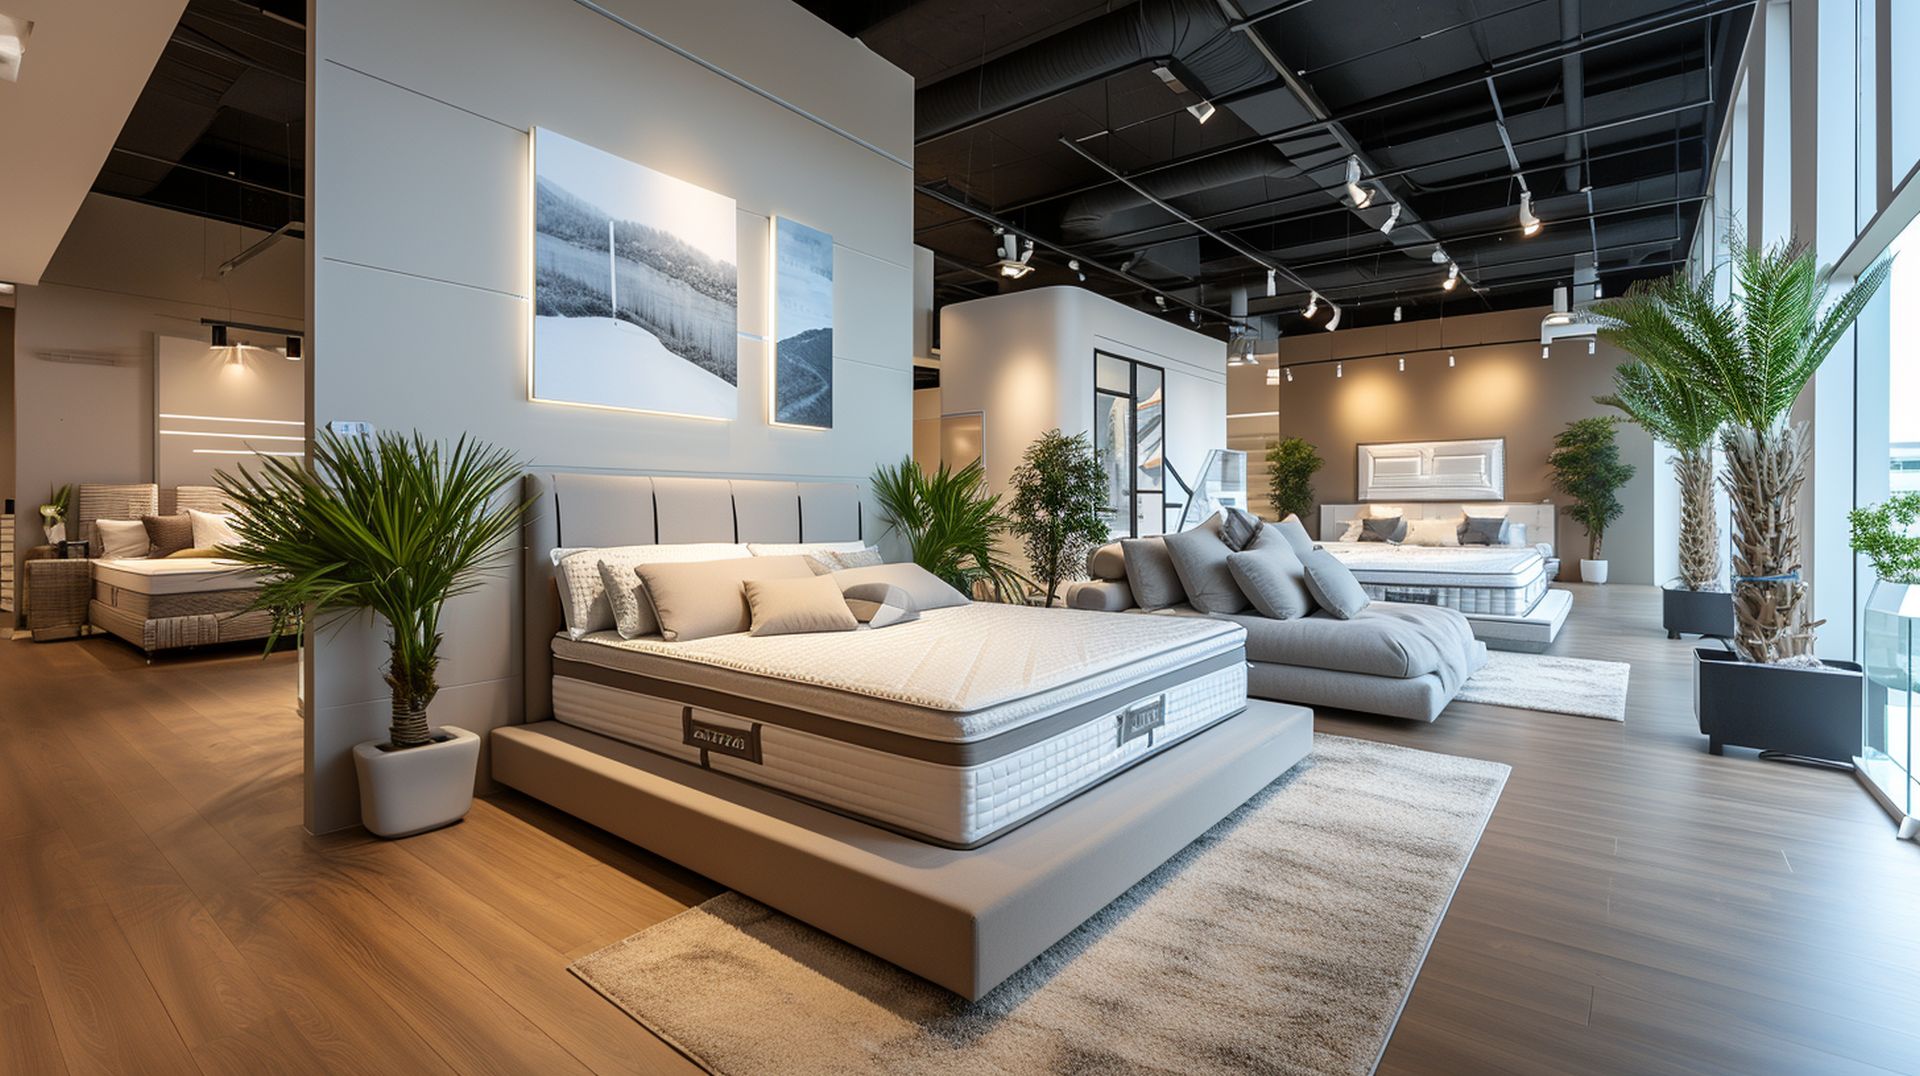 If you're looking for a new bed, mattress stores in Dorchester offer the best customer and delivery service, financing, and warranties in Massachusetts